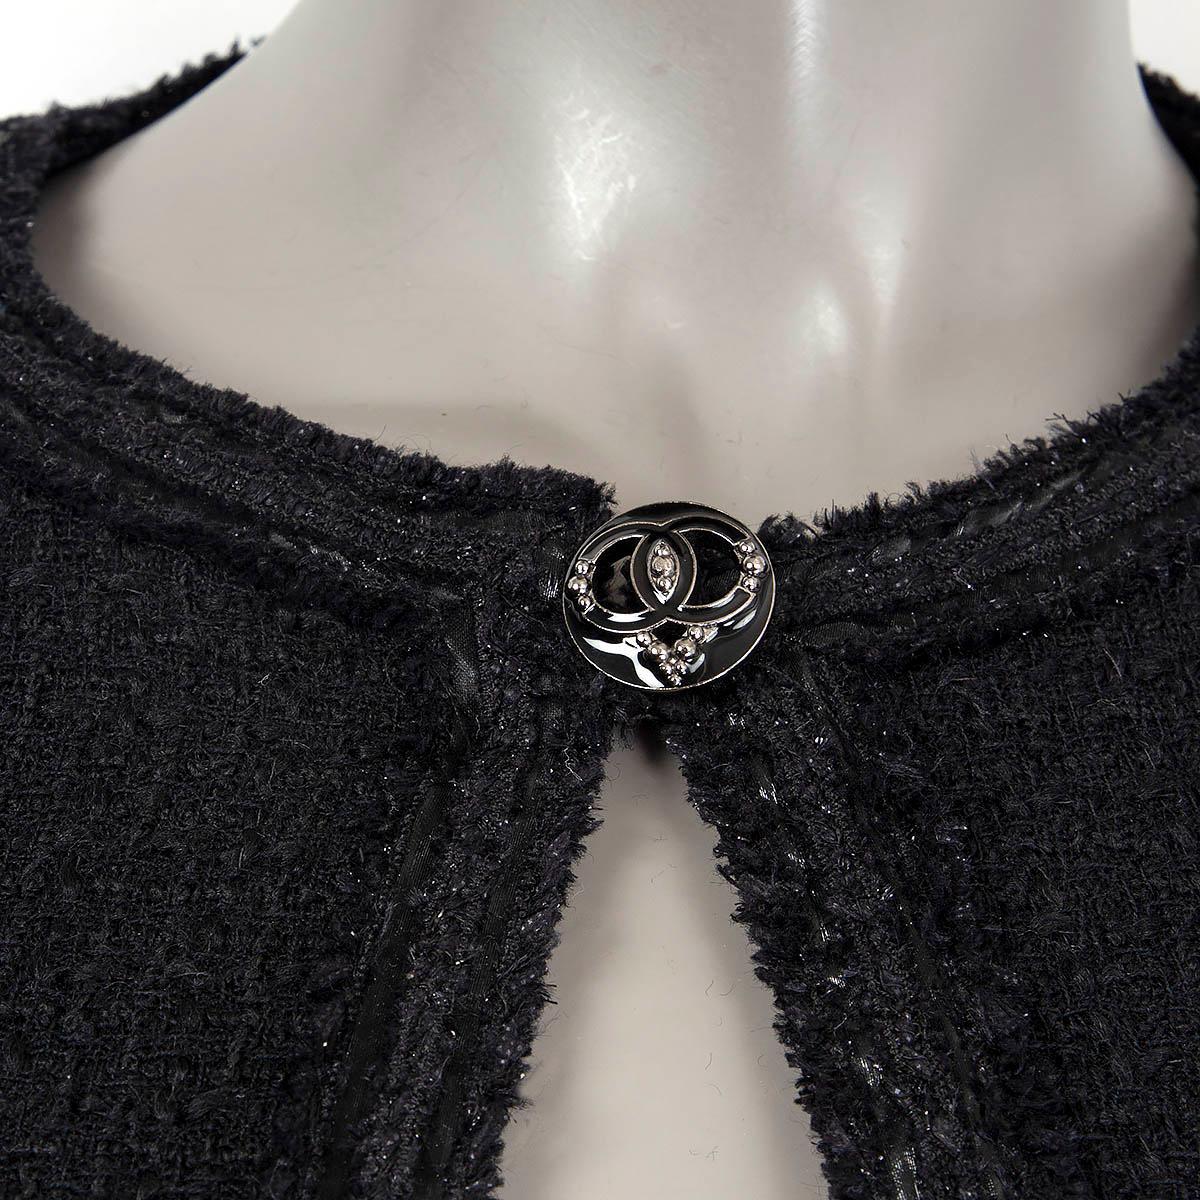 Extremely rare Chanel black lesage tweed jacket with CC Heart Patches at sleeves and back from Paris / MIAMI Cruise Collection. 
- front fastening wtih CC logo jewel heart-shaped button
- made of precious black lesage tweed with signature metallic